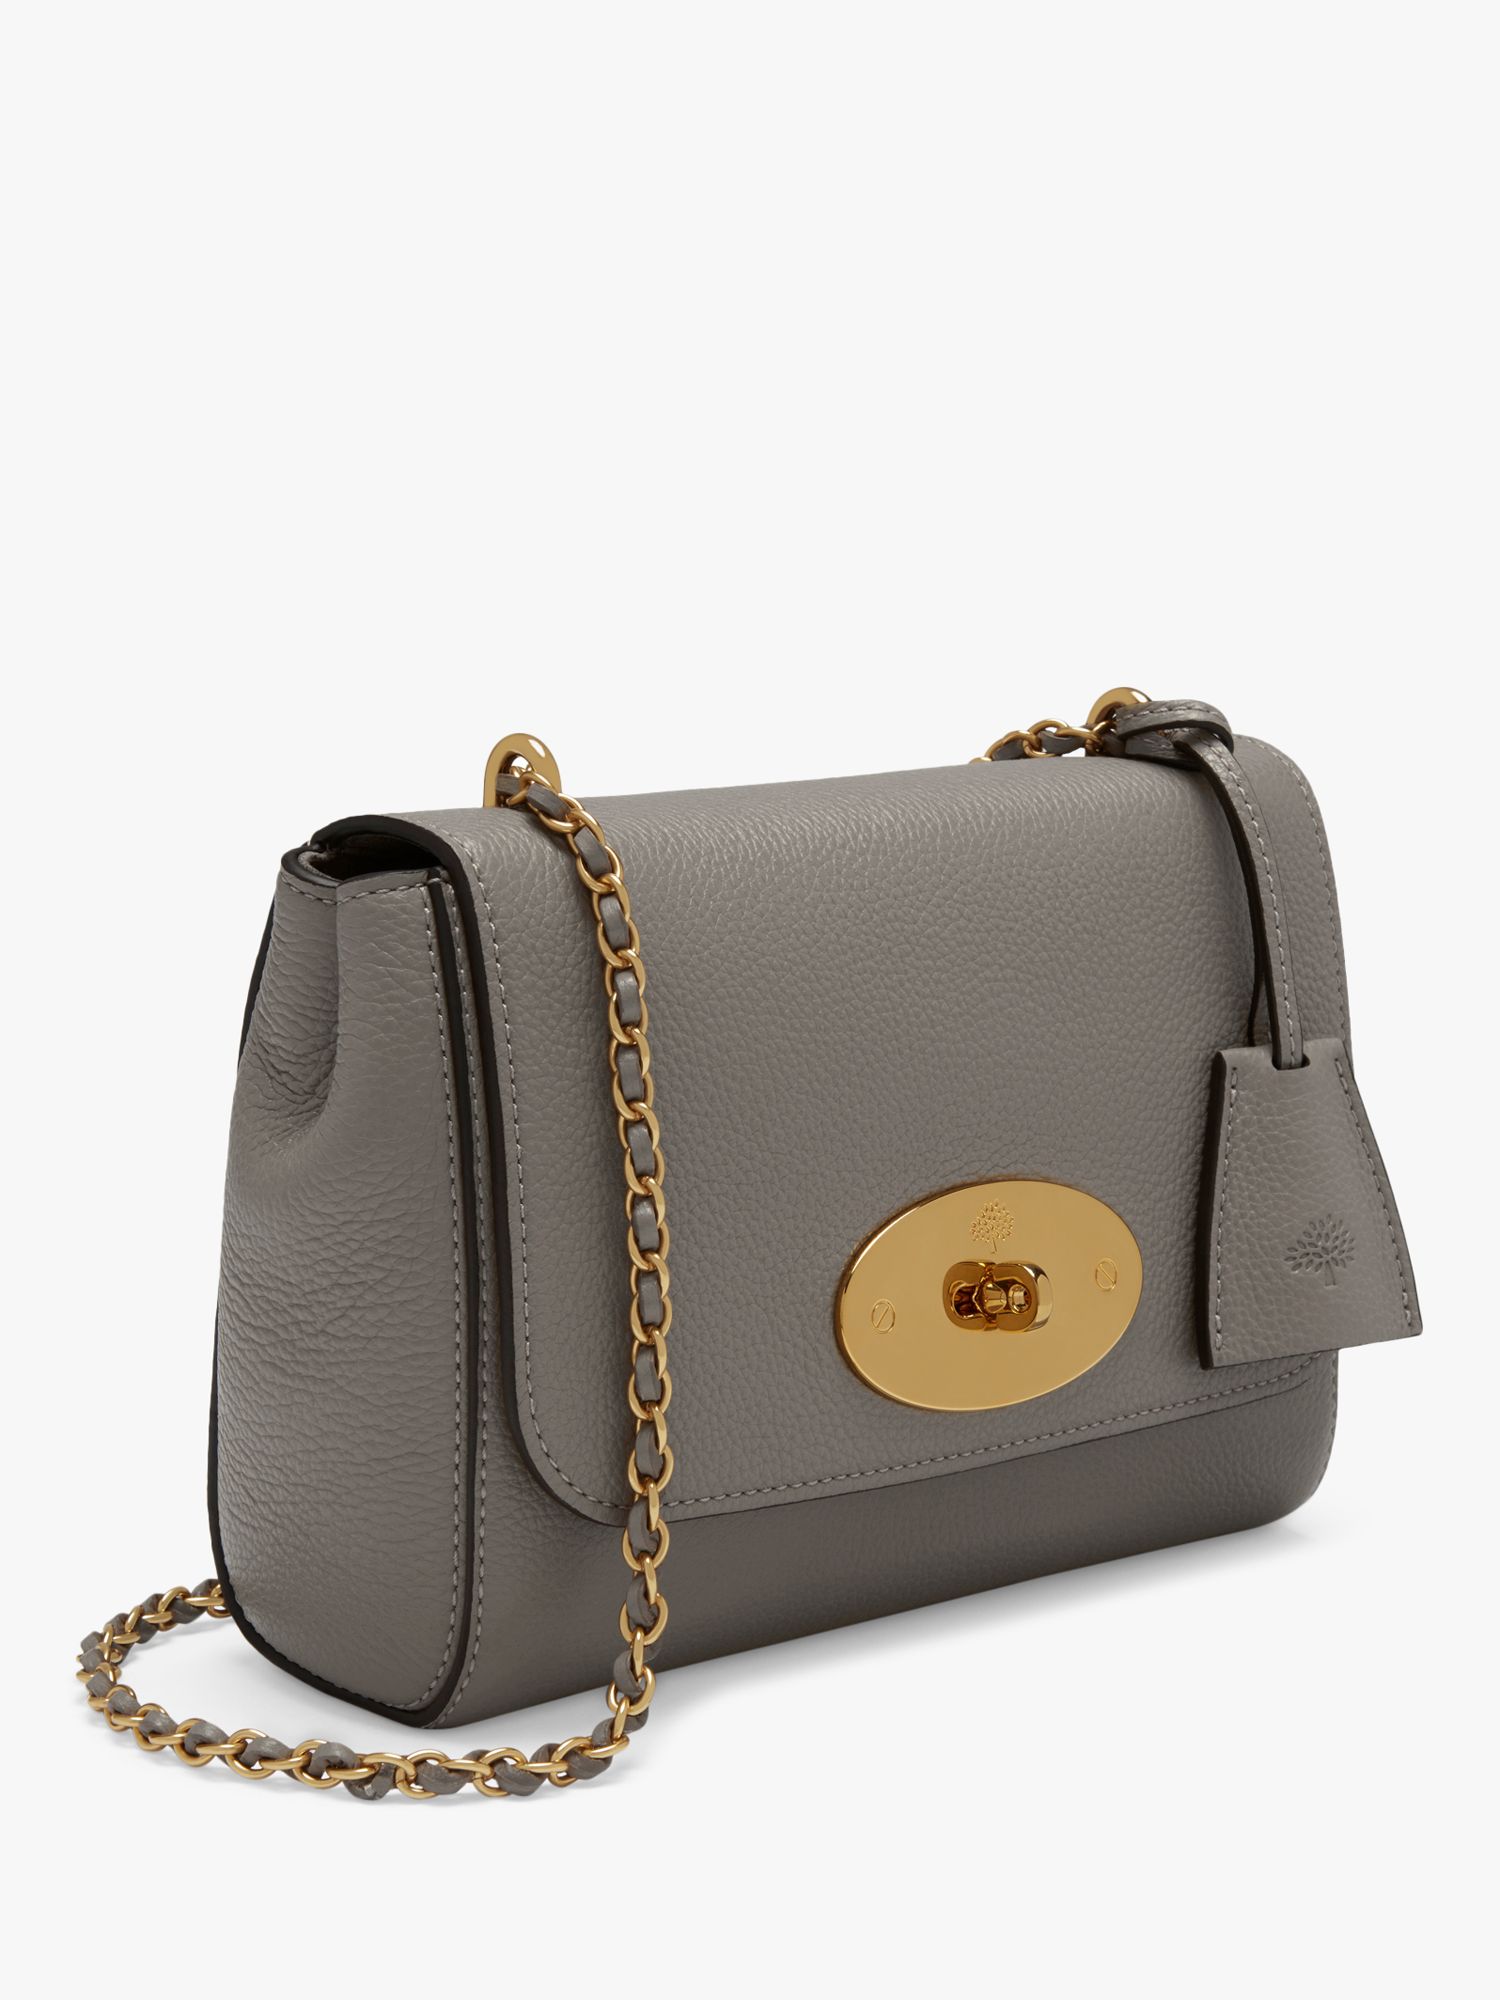 Mulberry Lily Classic Grain Leather Shoulder Bag, Charcoal at John ...